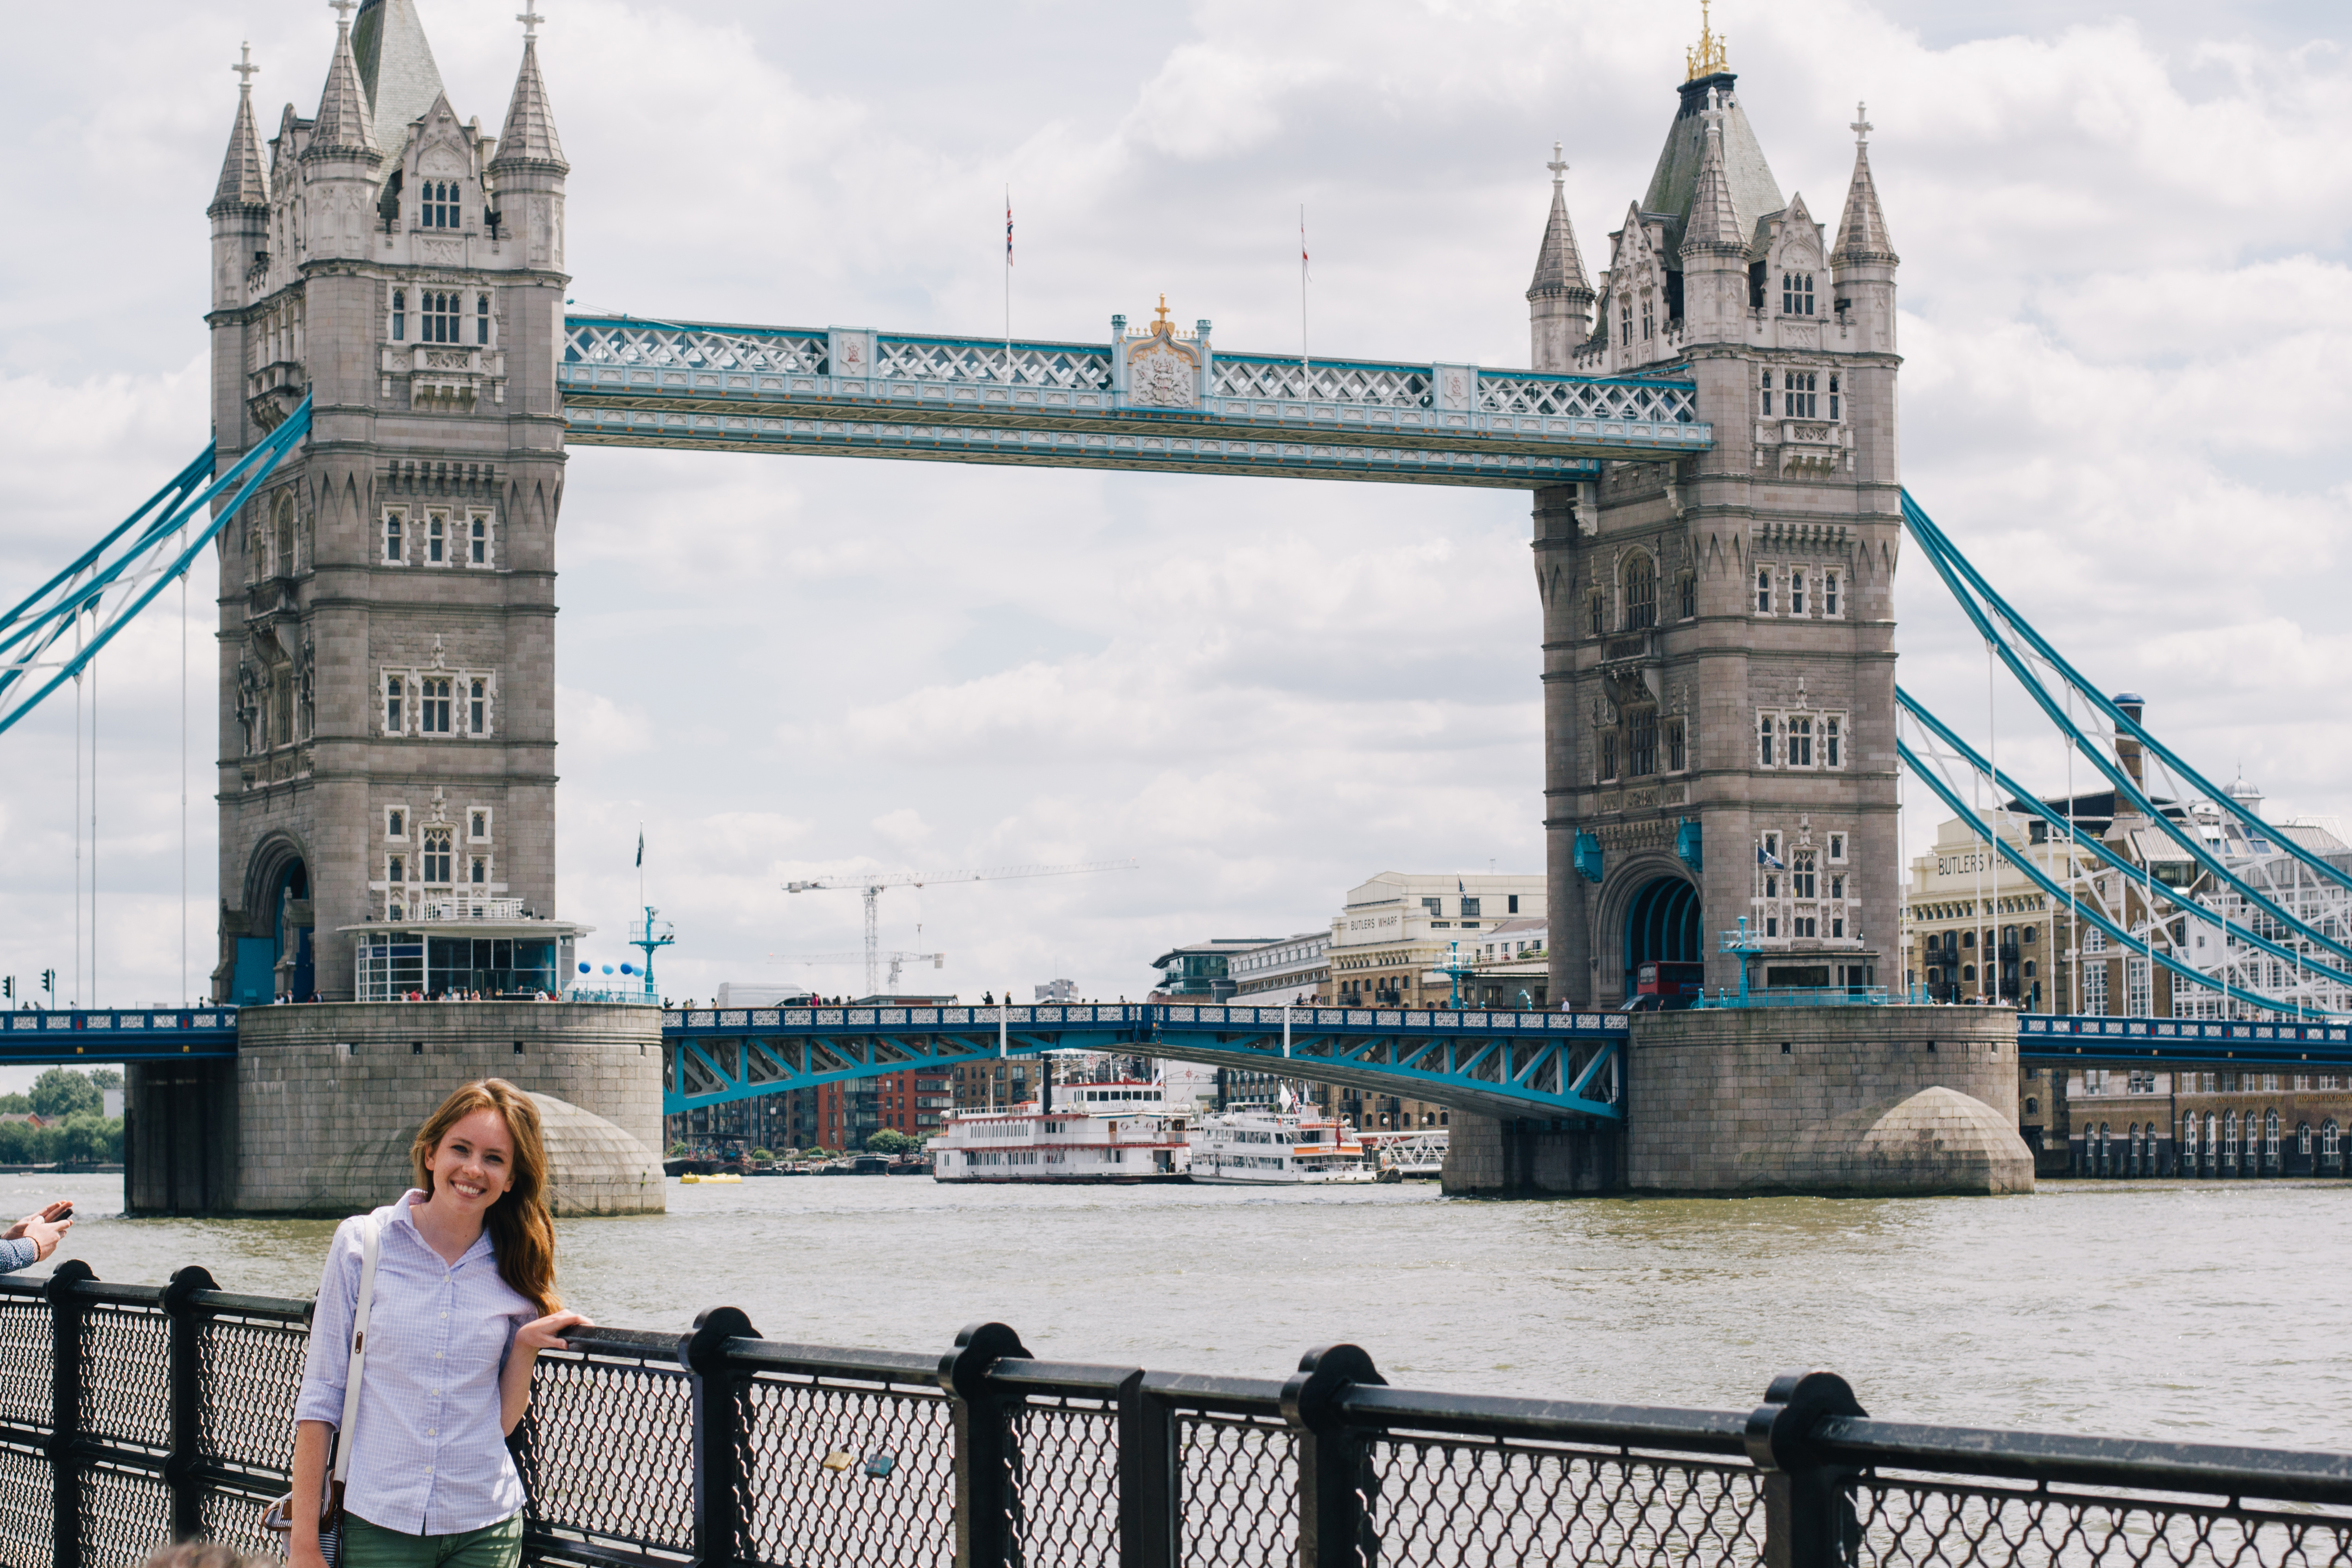 Brooke Alius poses next to Tower Bridge in London, England. Brooke started planning for the trip and bought tickets in February and traveled in June. (Photo courtesy of Brooke Alius)